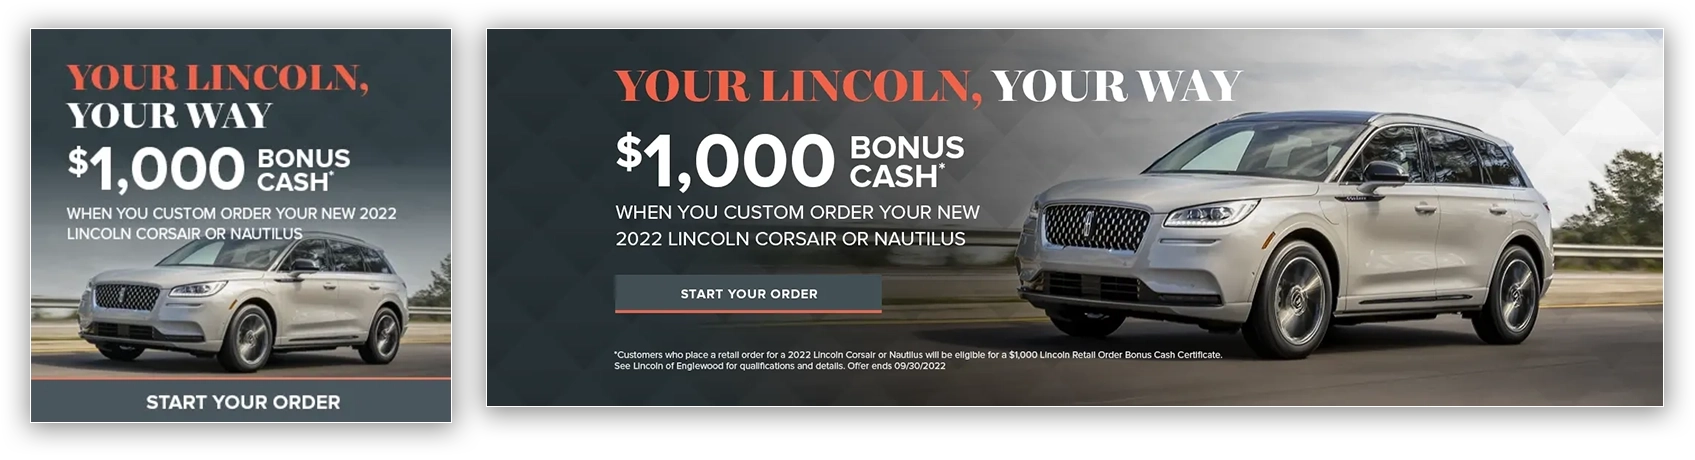 Lincoln Blacl Label mobile and desktop homepage slides